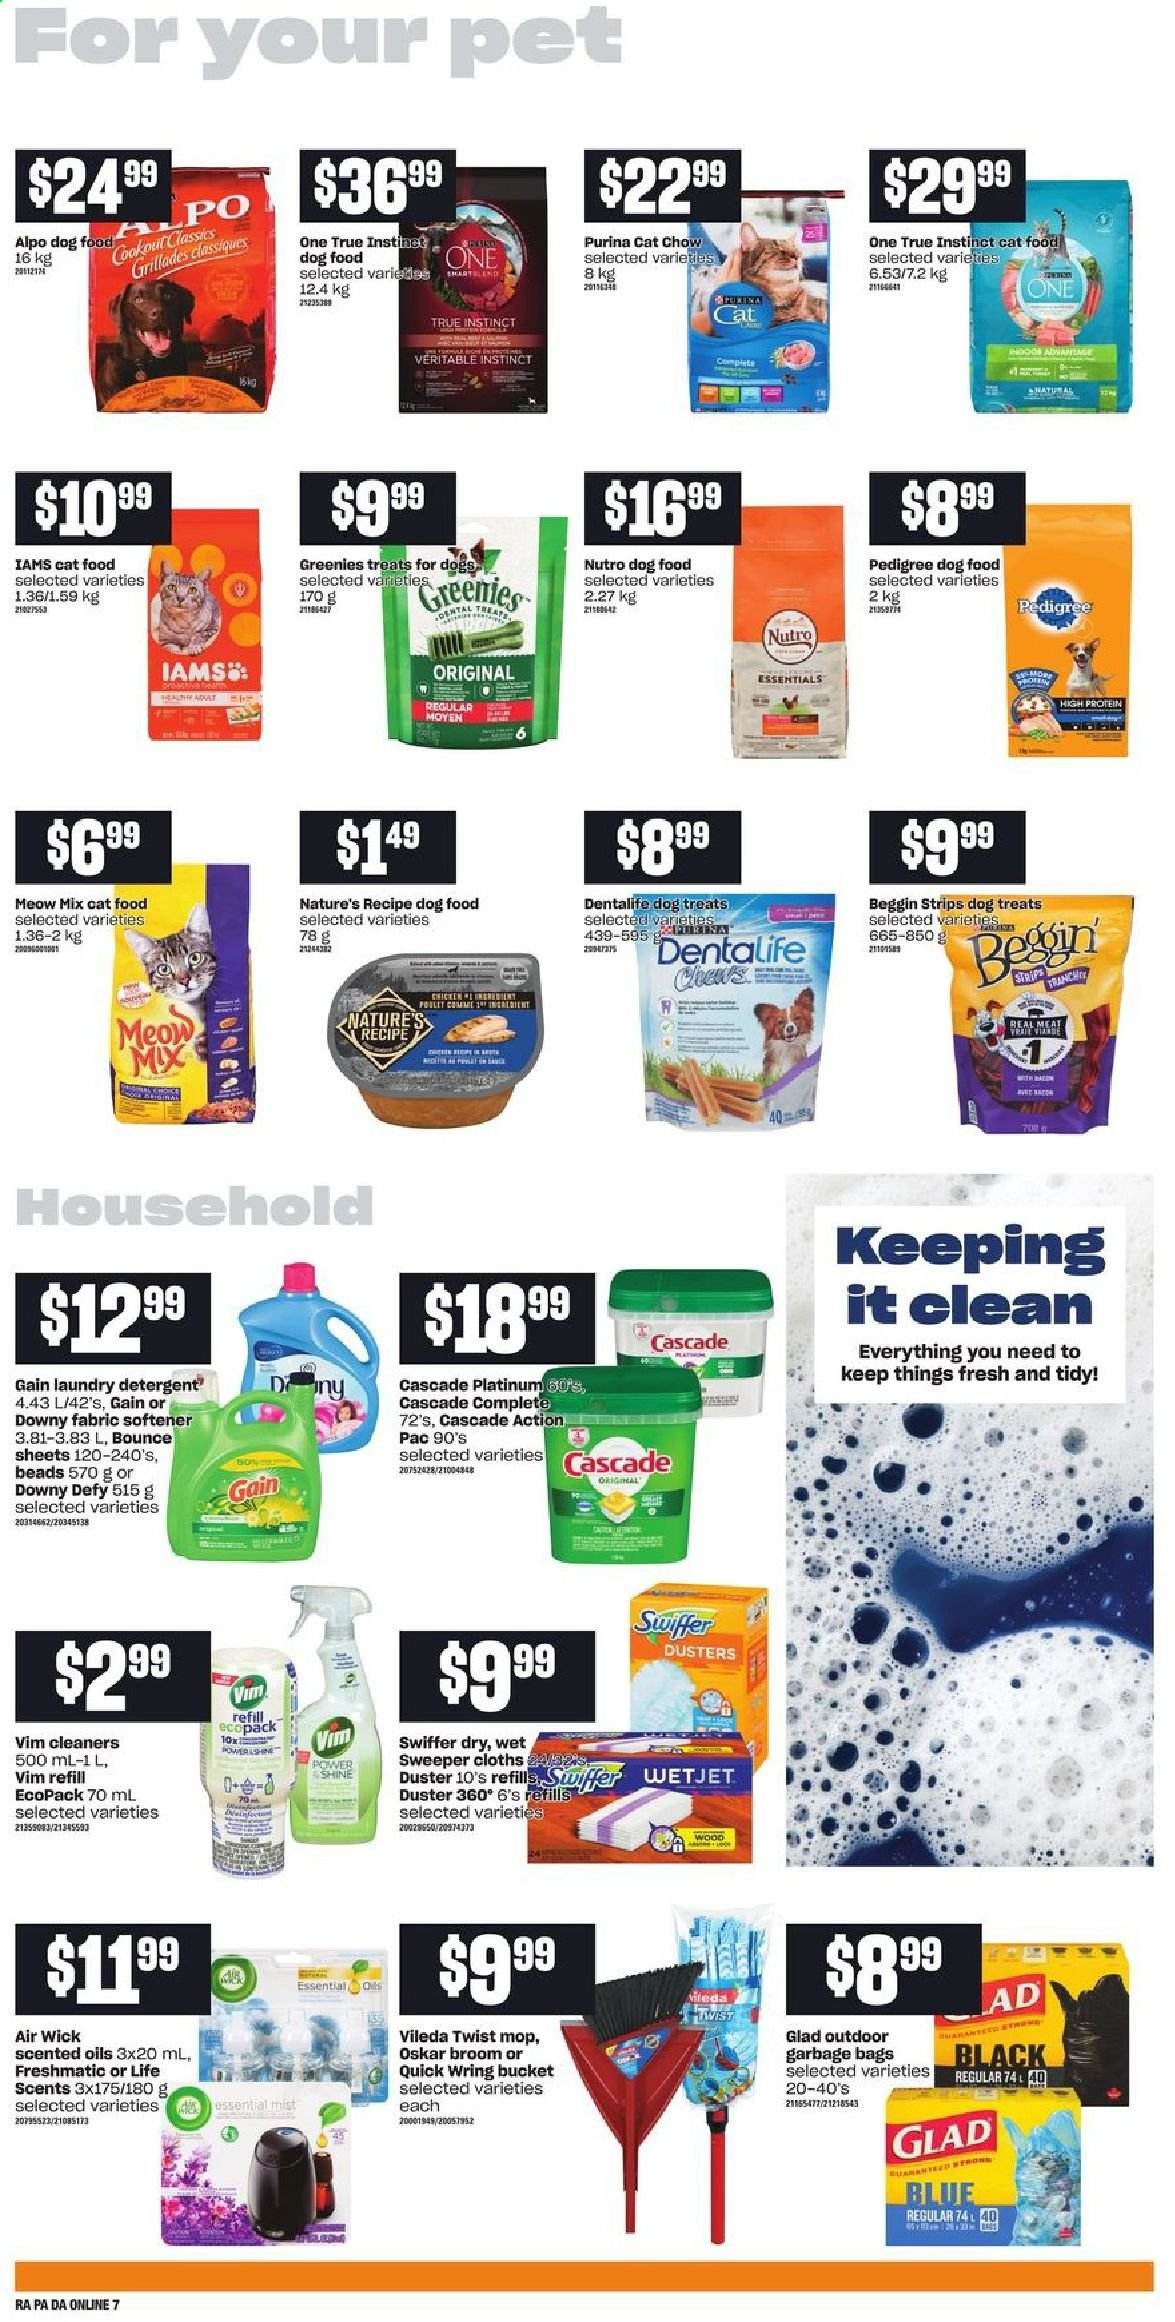 thumbnail - Atlantic Superstore Flyer - June 30, 2021 - July 07, 2021 - Sales products - strips, Gain, Swiffer, fabric softener, laundry detergent, Bounce, Cascade, Downy Laundry, bag, Greenies, animal food, cat food, dog food, Purina, Pedigree, Dentalife, Meow Mix, Alpo, Iams. Page 11.